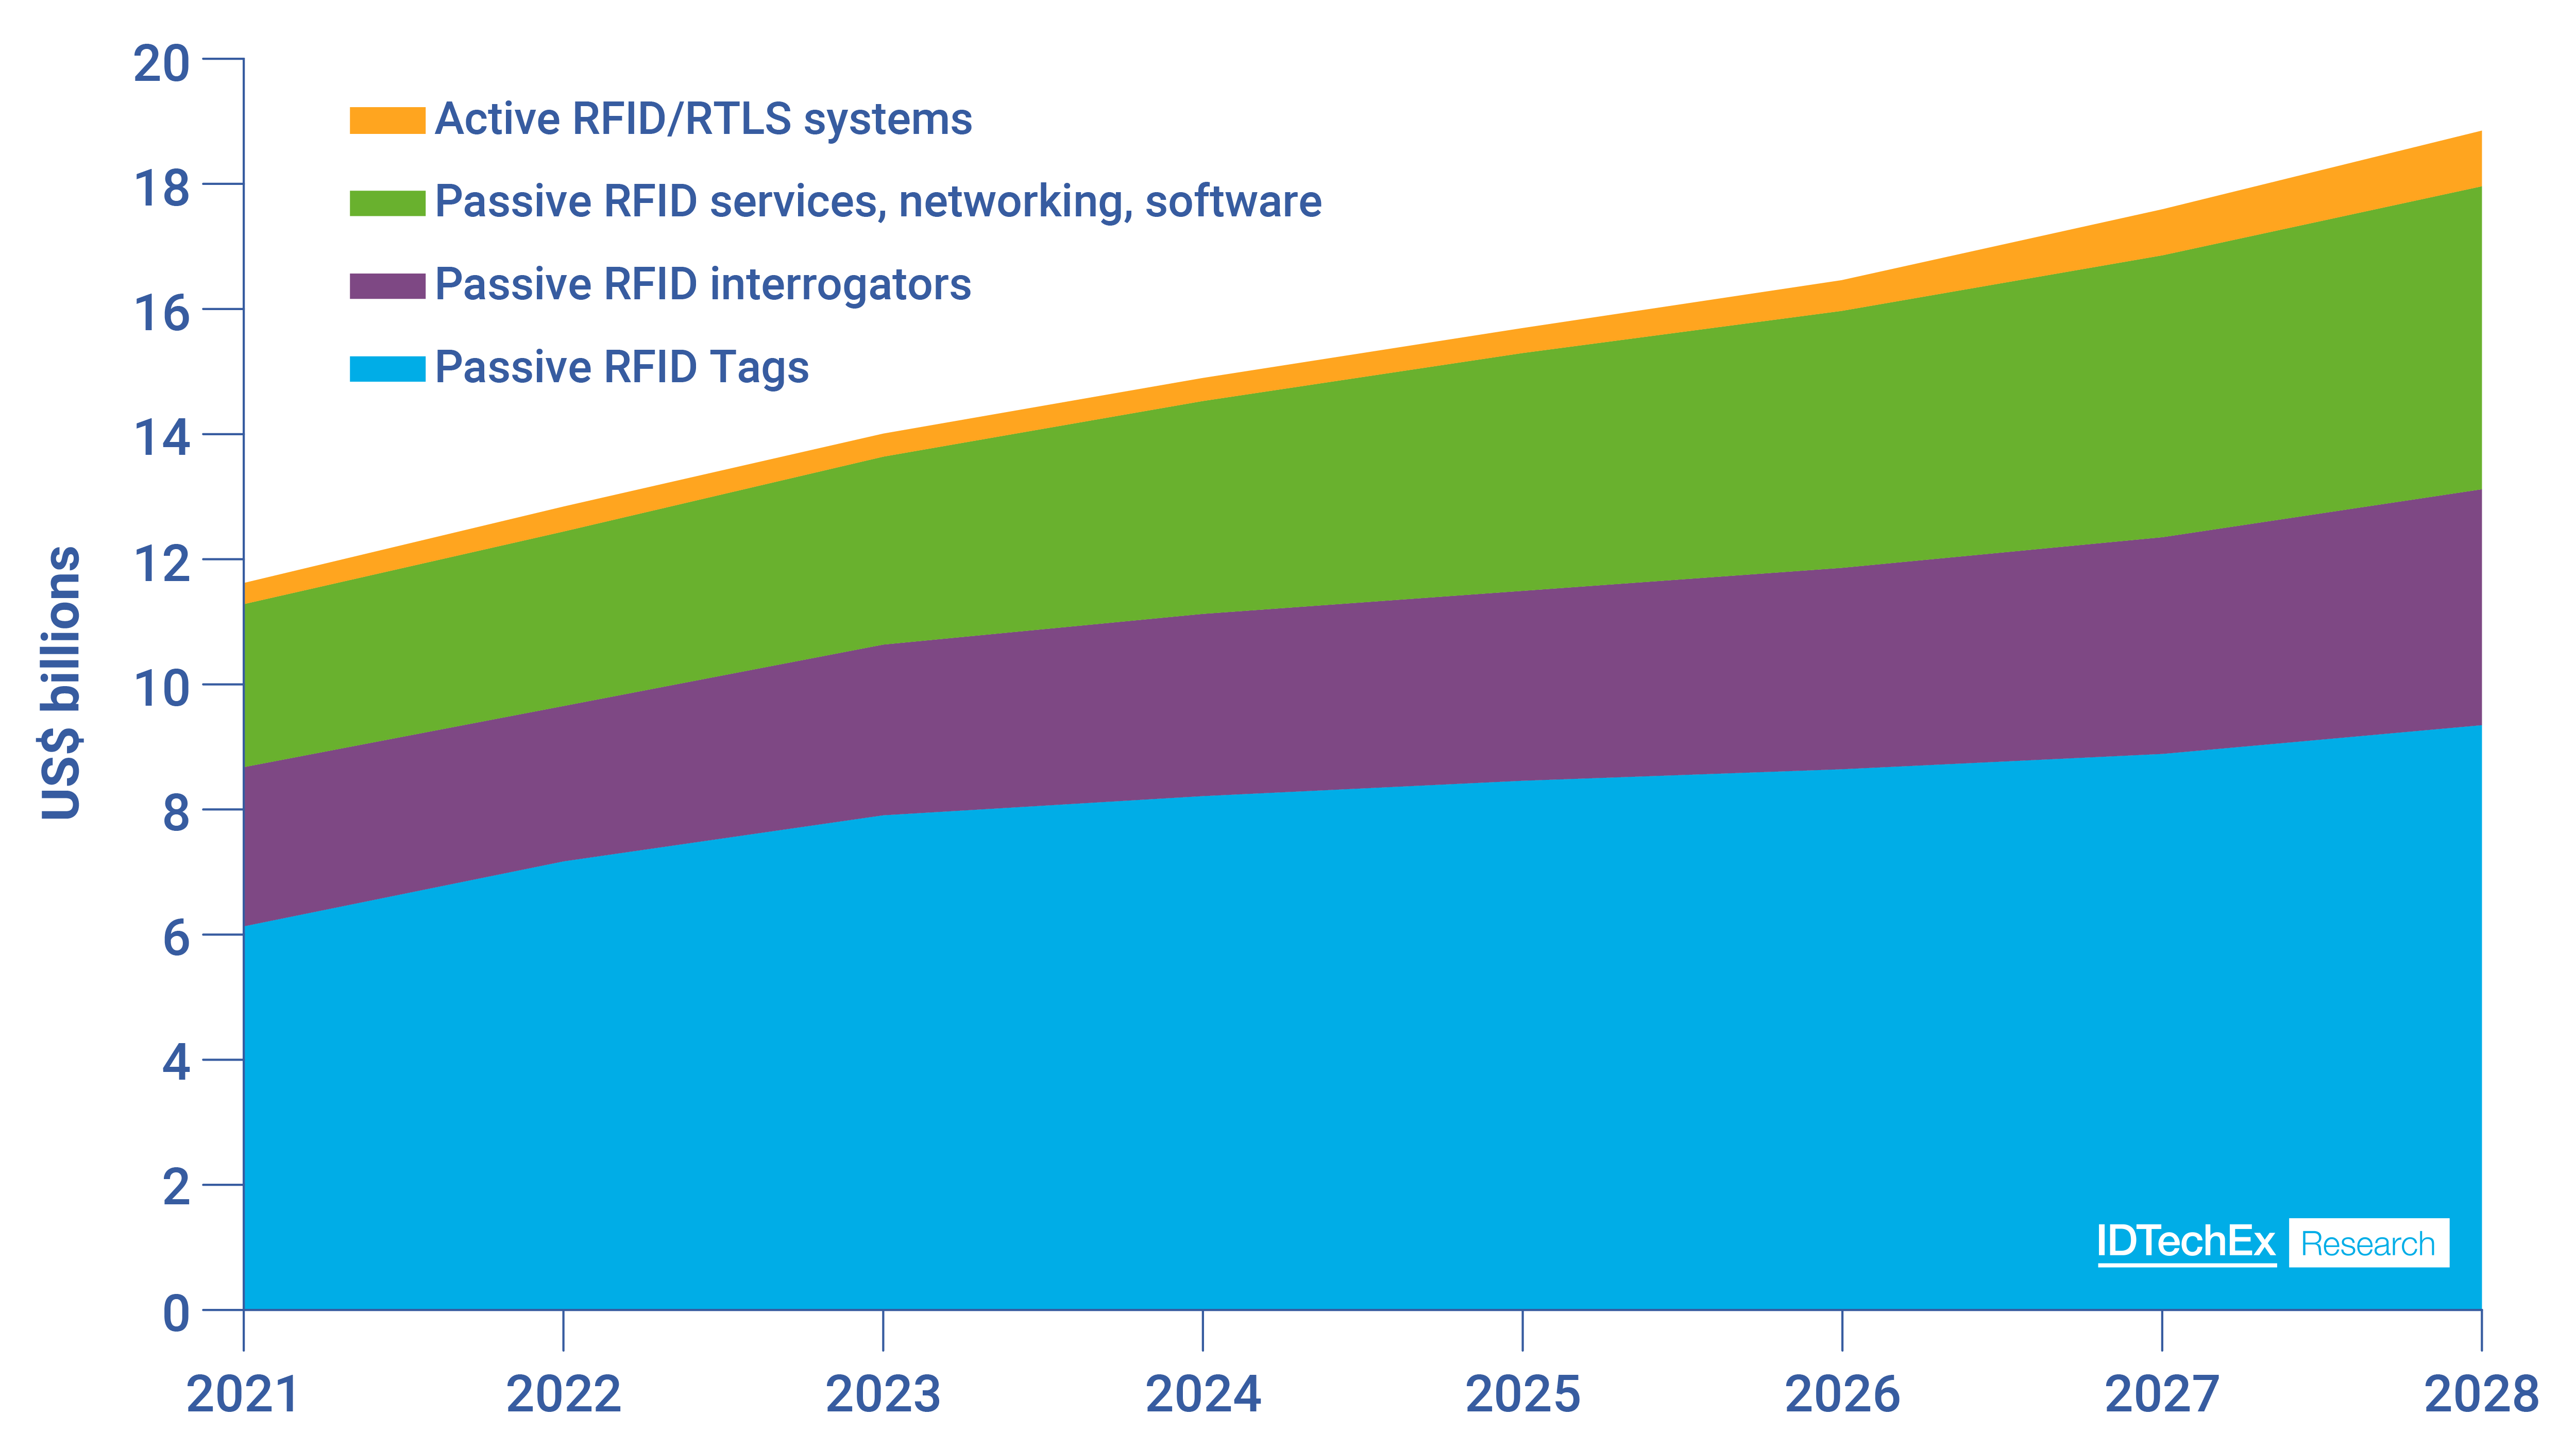 Total RFID market size 2021-2028. Source: IDTechEx - 